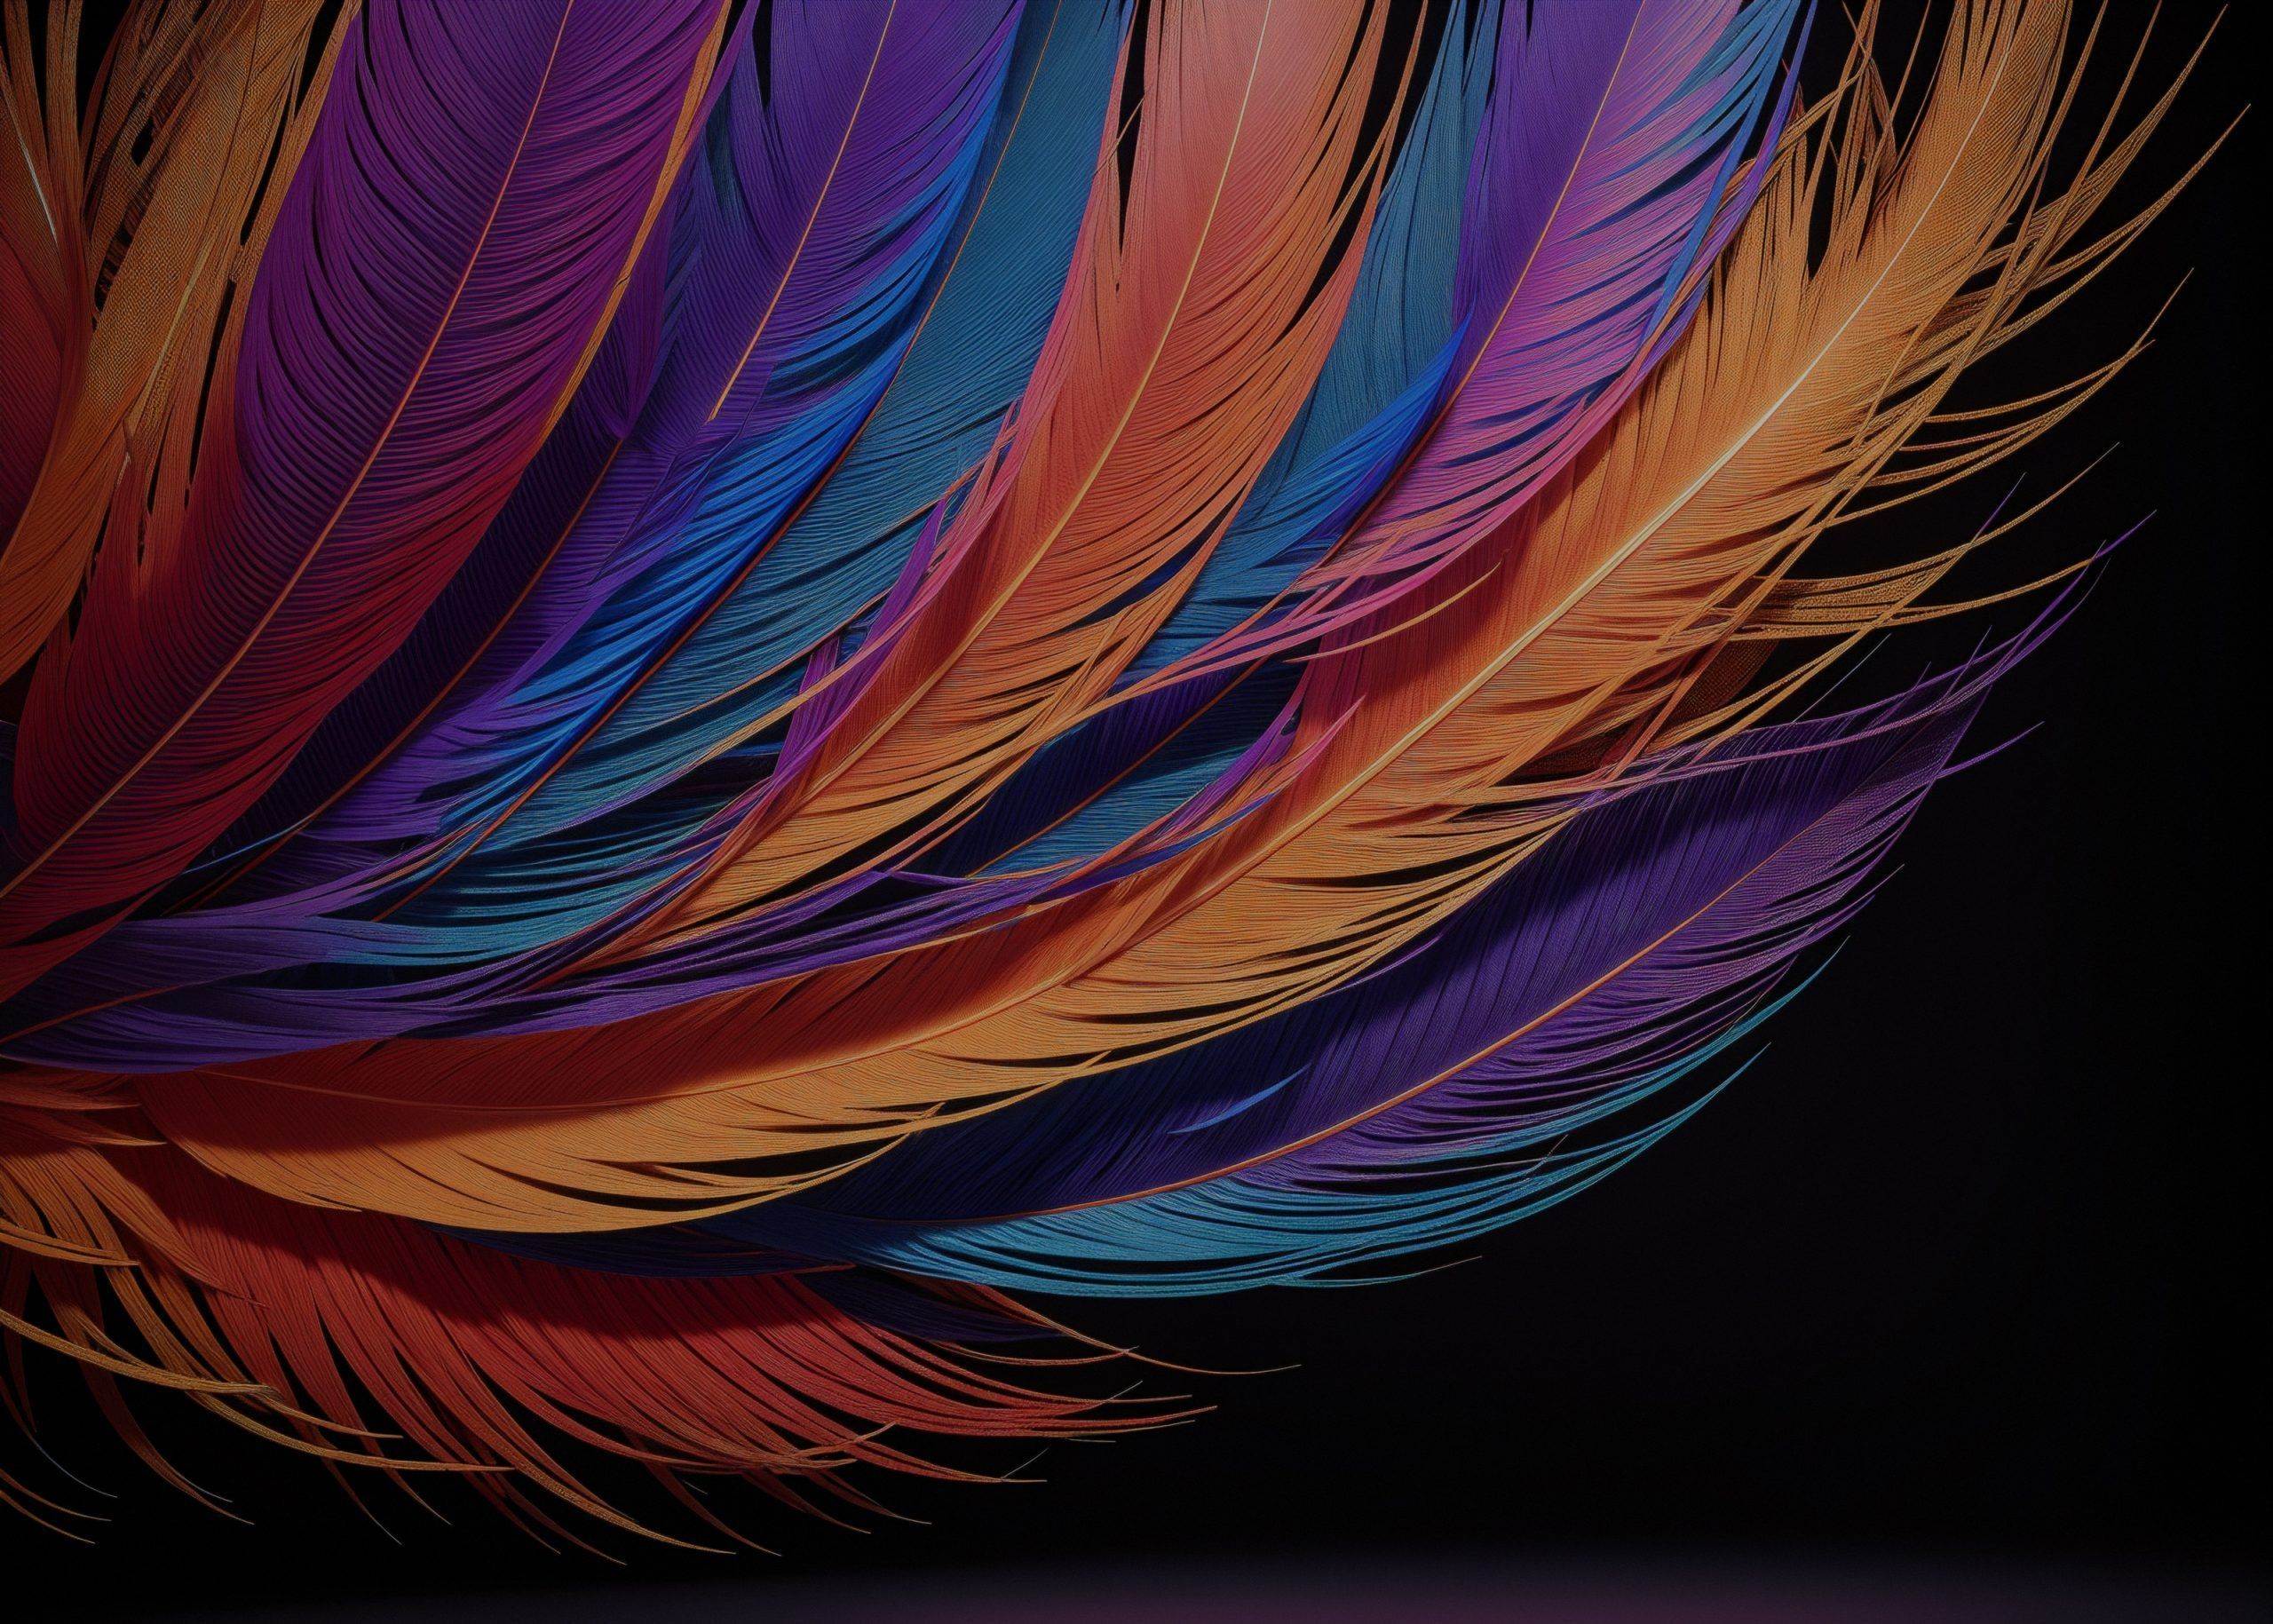 A wallpaper image of a colorful feather on a black background - Feathers